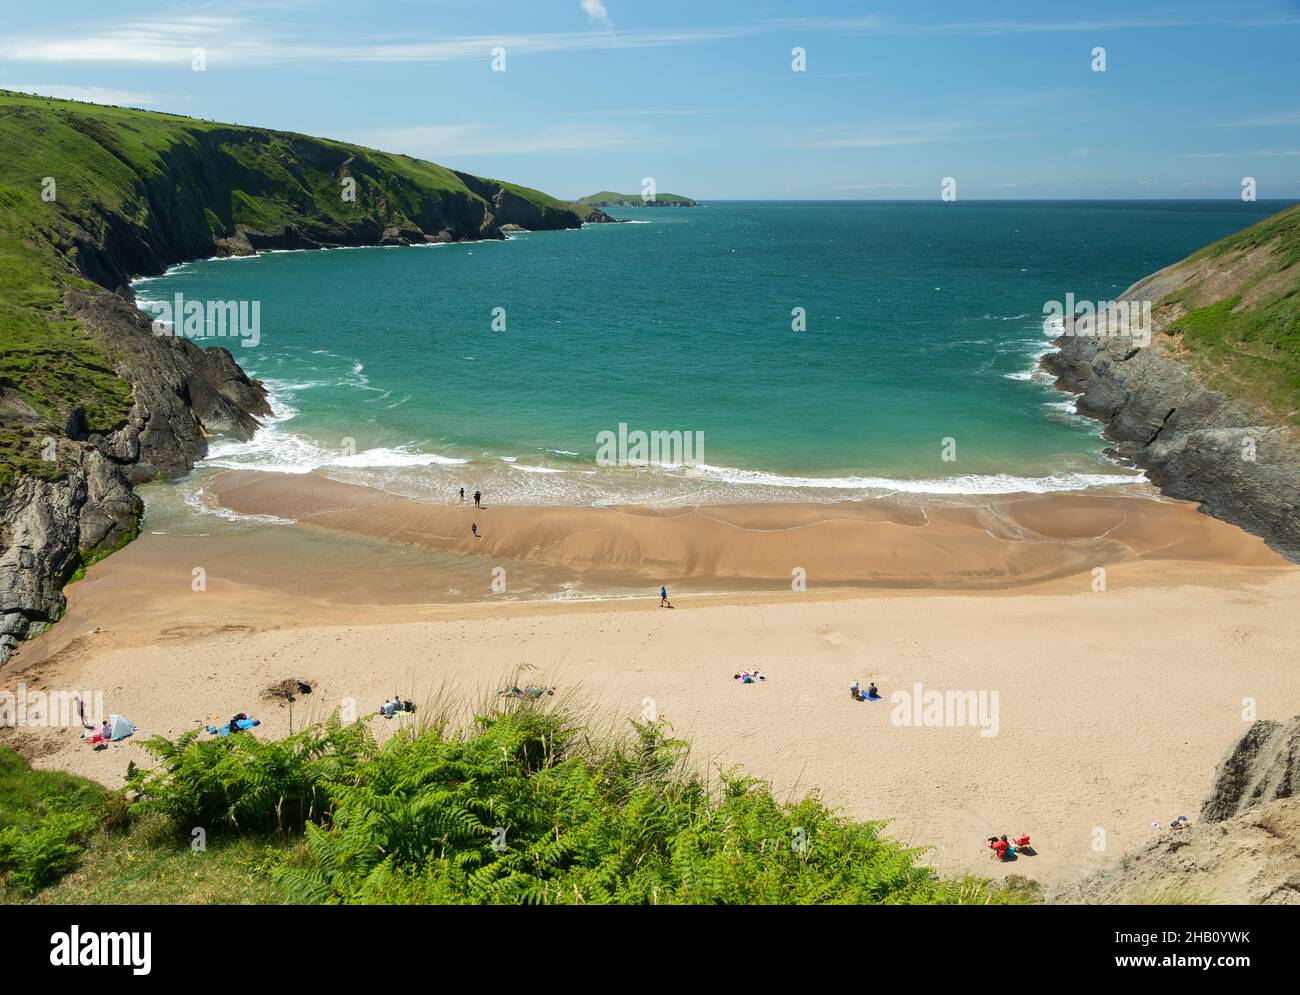 Mwnt Beach, Cardigan Bay, Ceredigion, pays de Galles, Royaume-Uni,Europe Banque D'Images